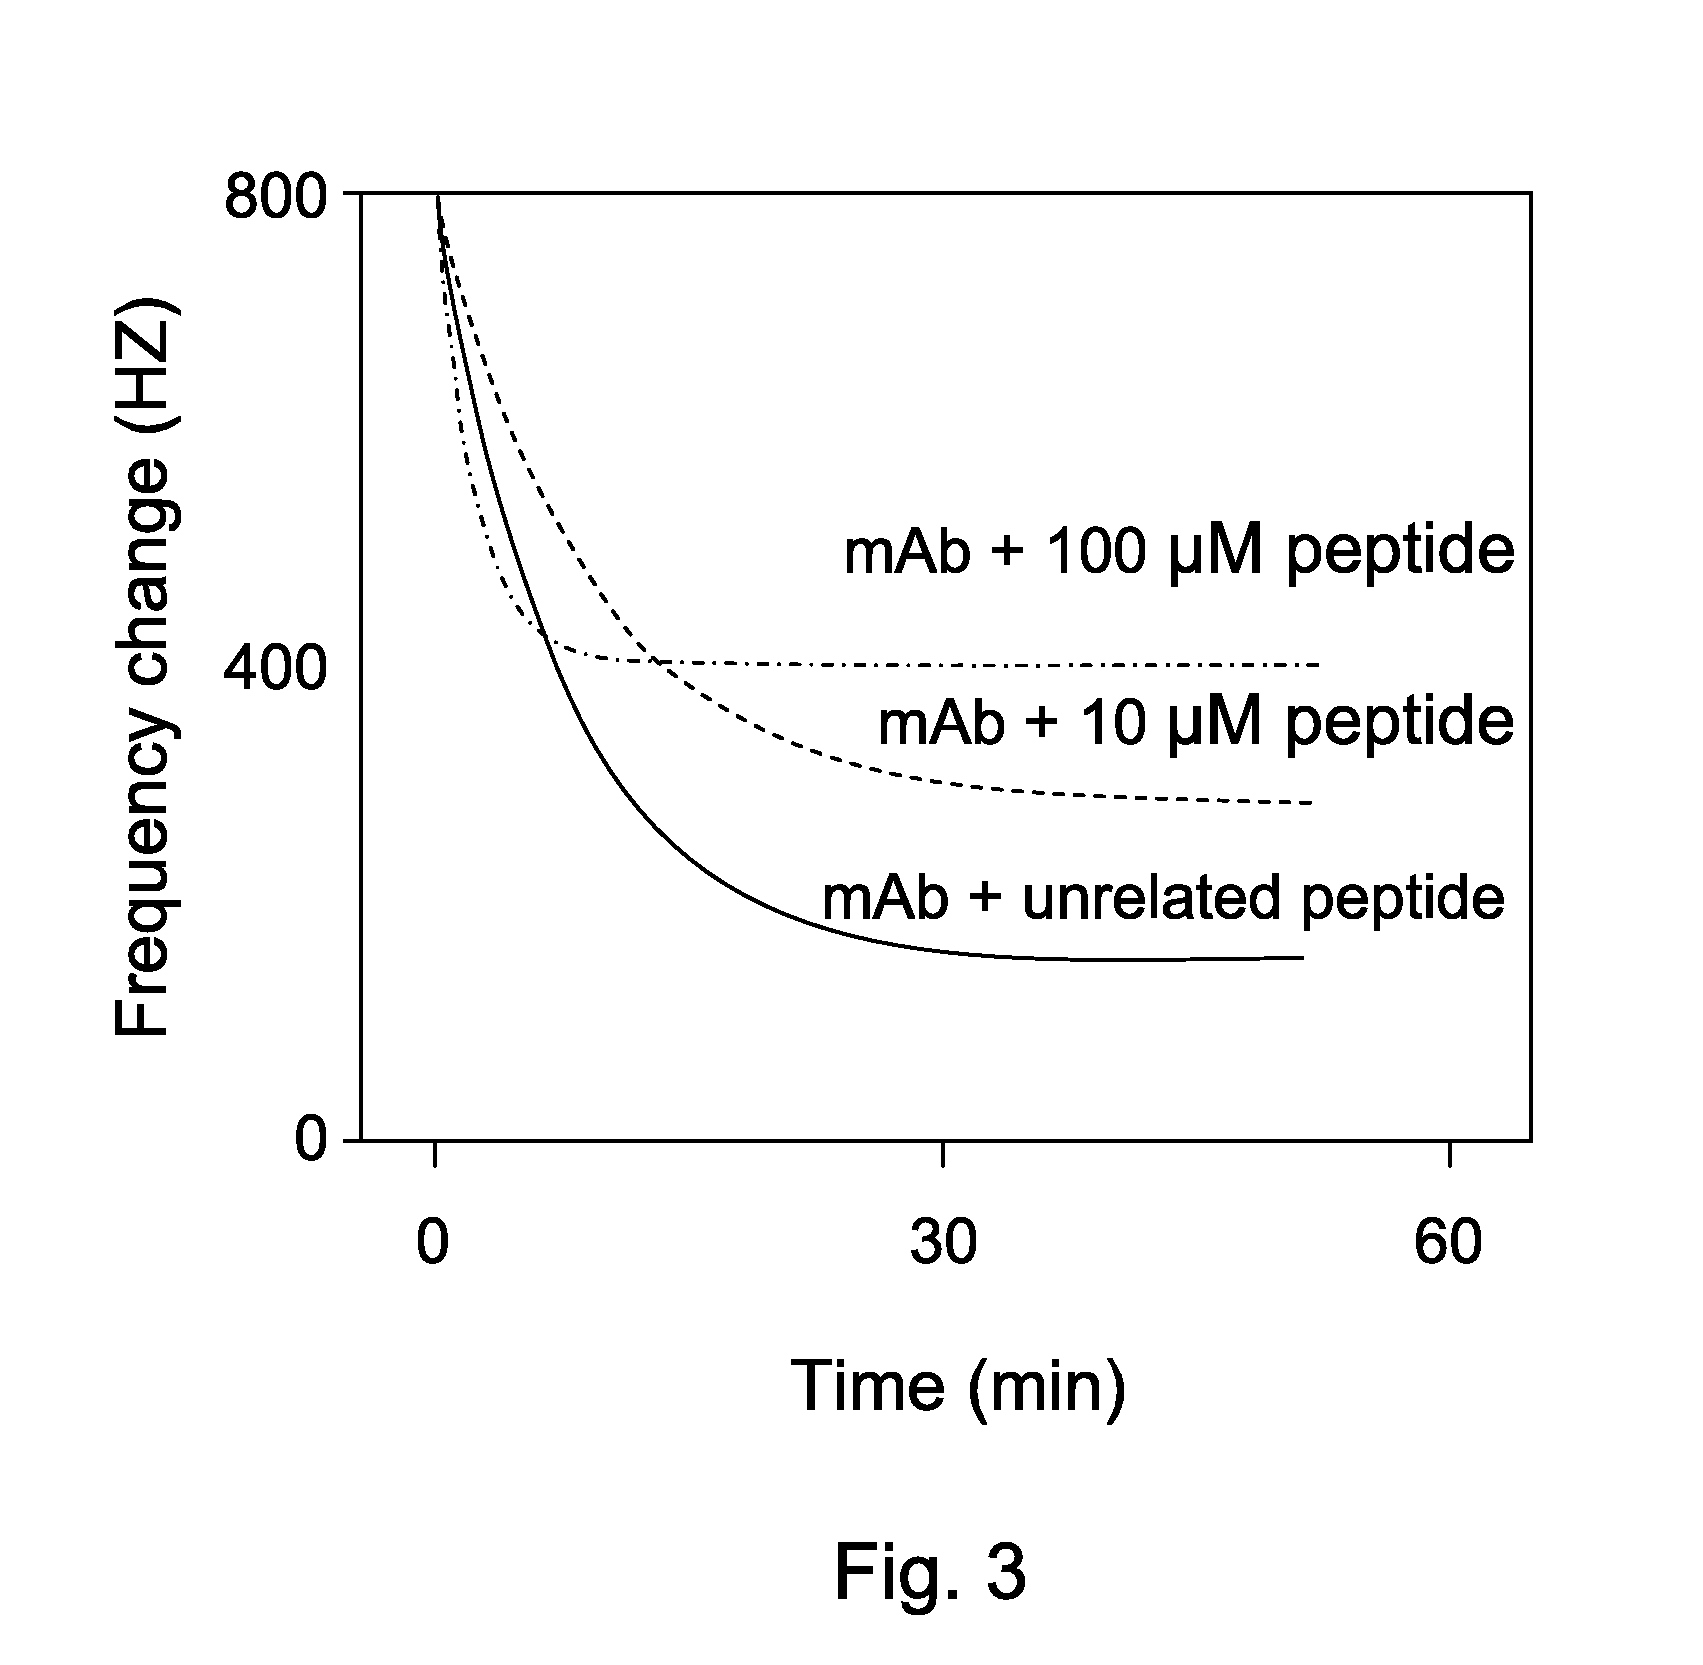 Method for producing complete human neutralizing antibody for high mobility group box 1 (HMGB1) and the use to treat or inhibit HMGB1-associated neuromyelitis